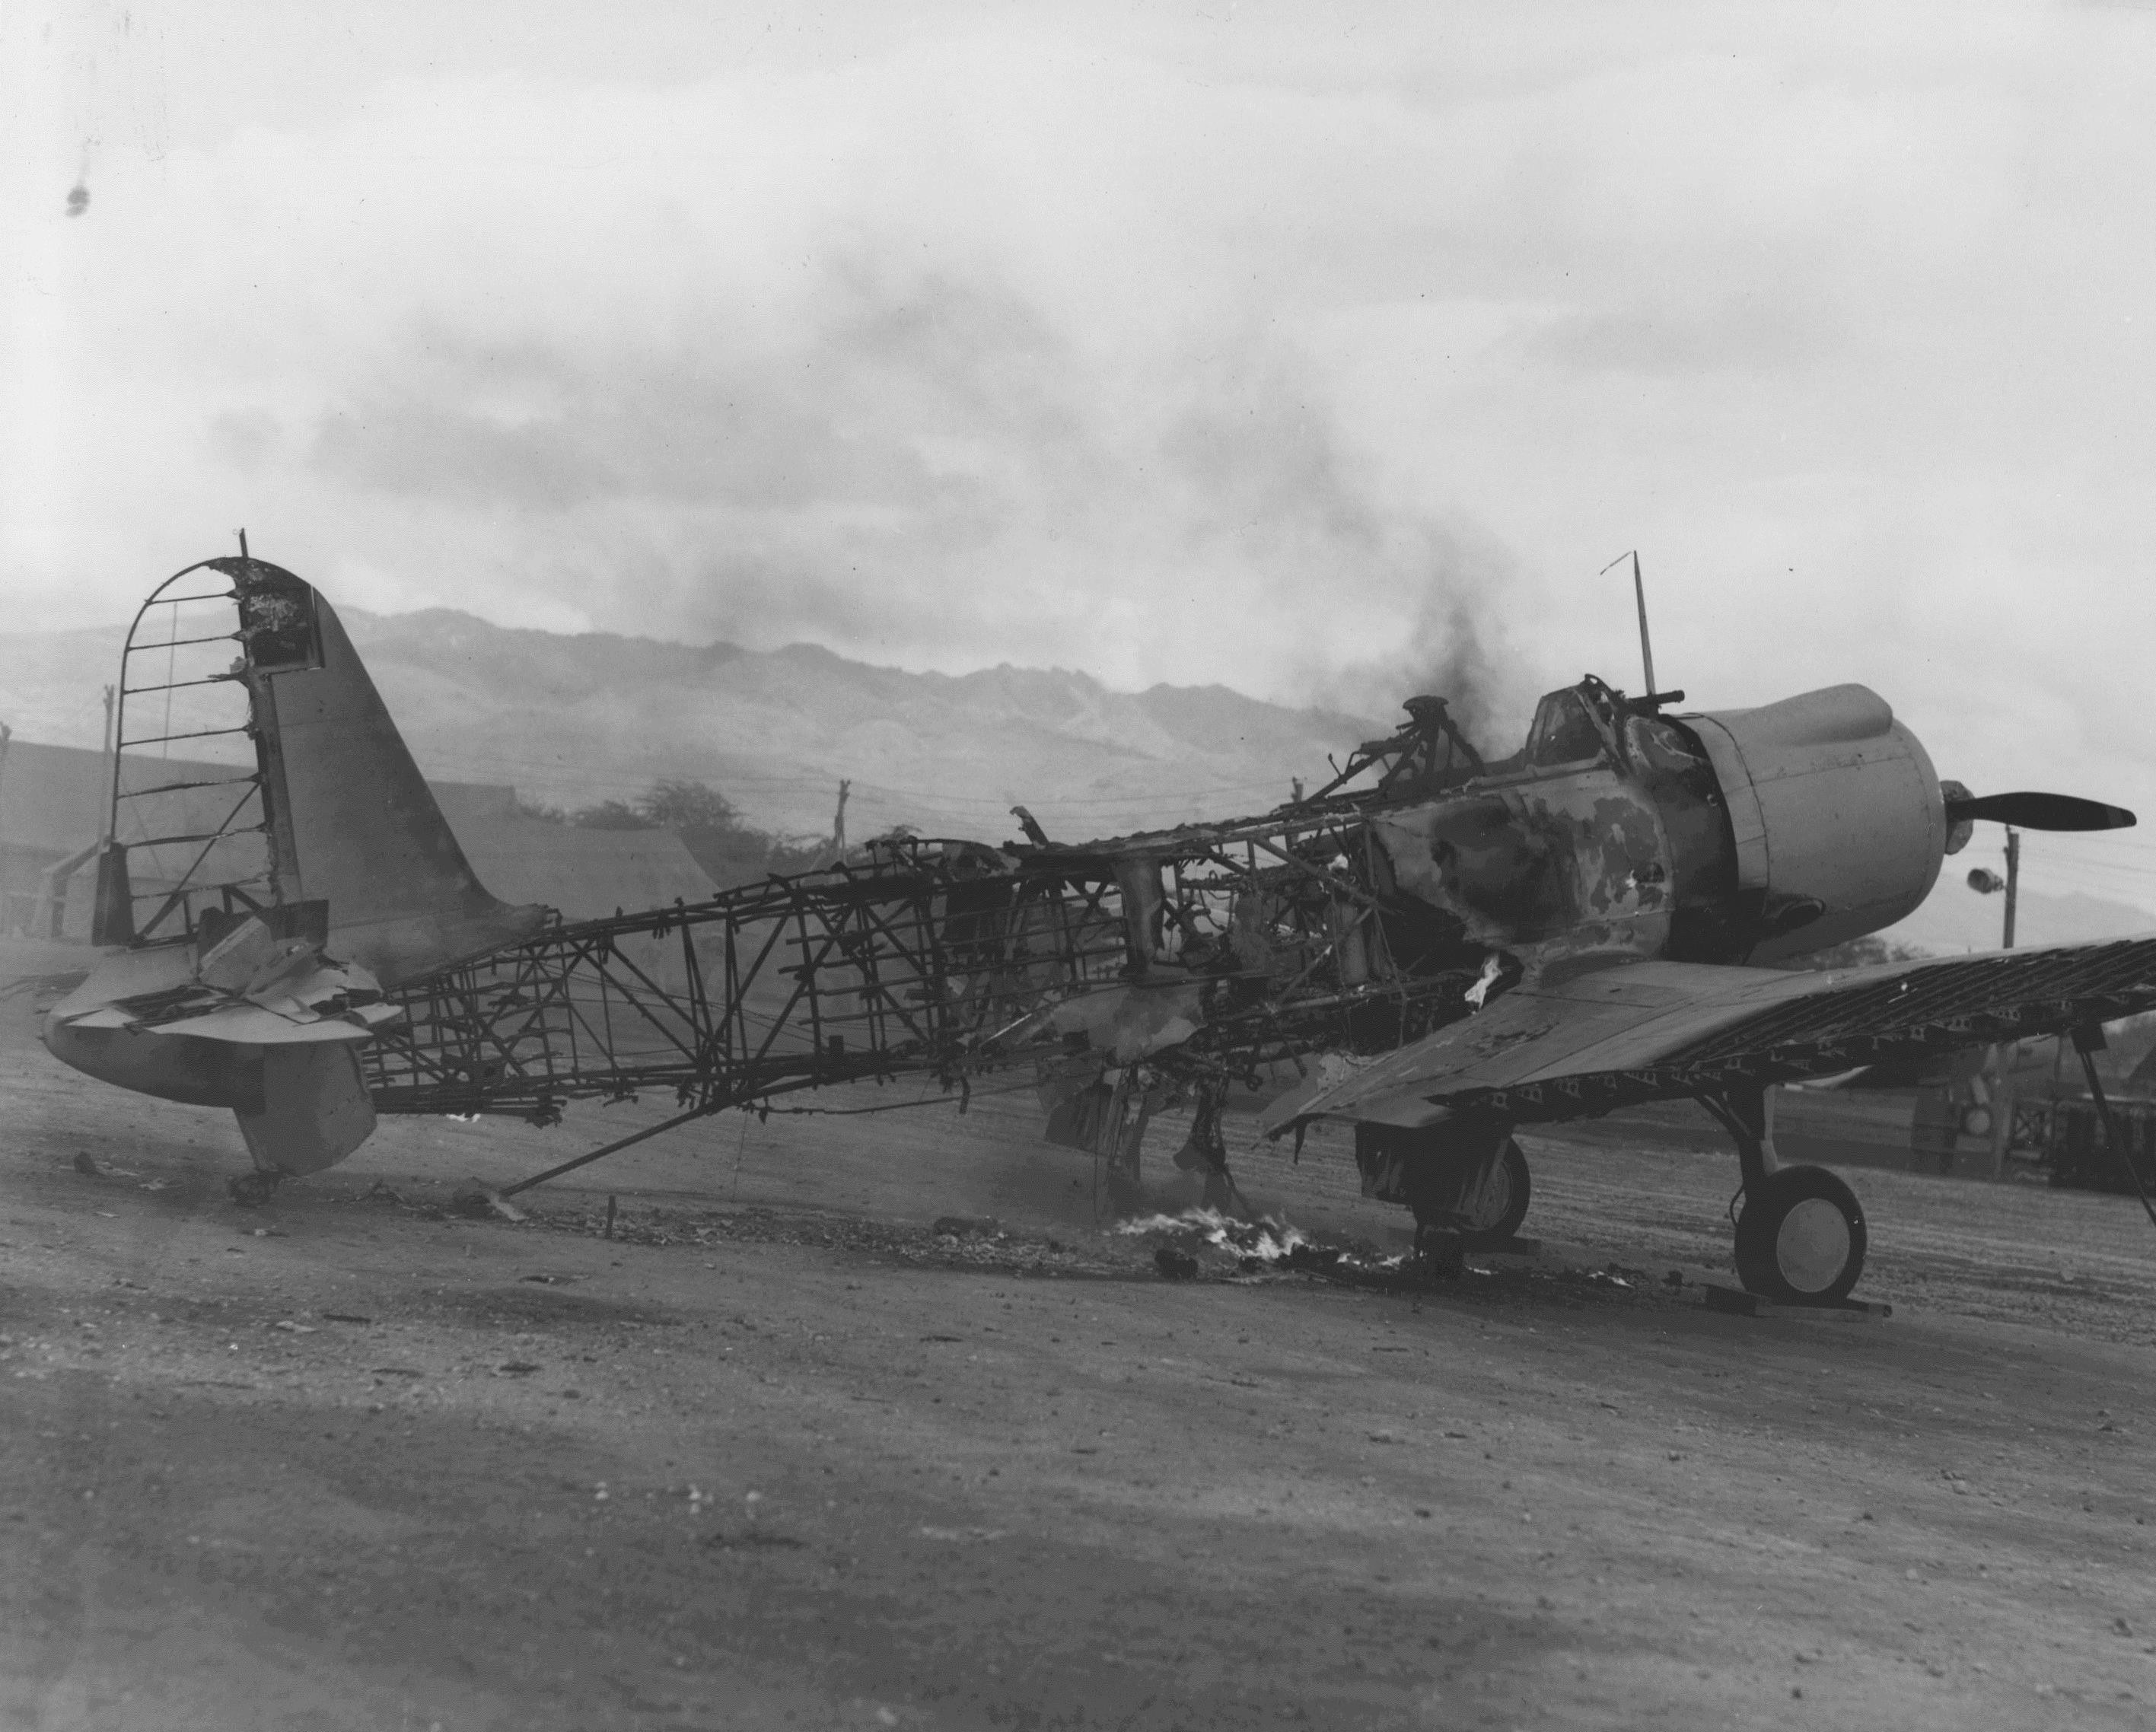 A Vought SB2U Vindicator dive-bomber, still smoldering, shortly after the Japanese attack on Ewa and Pearl Harbor.